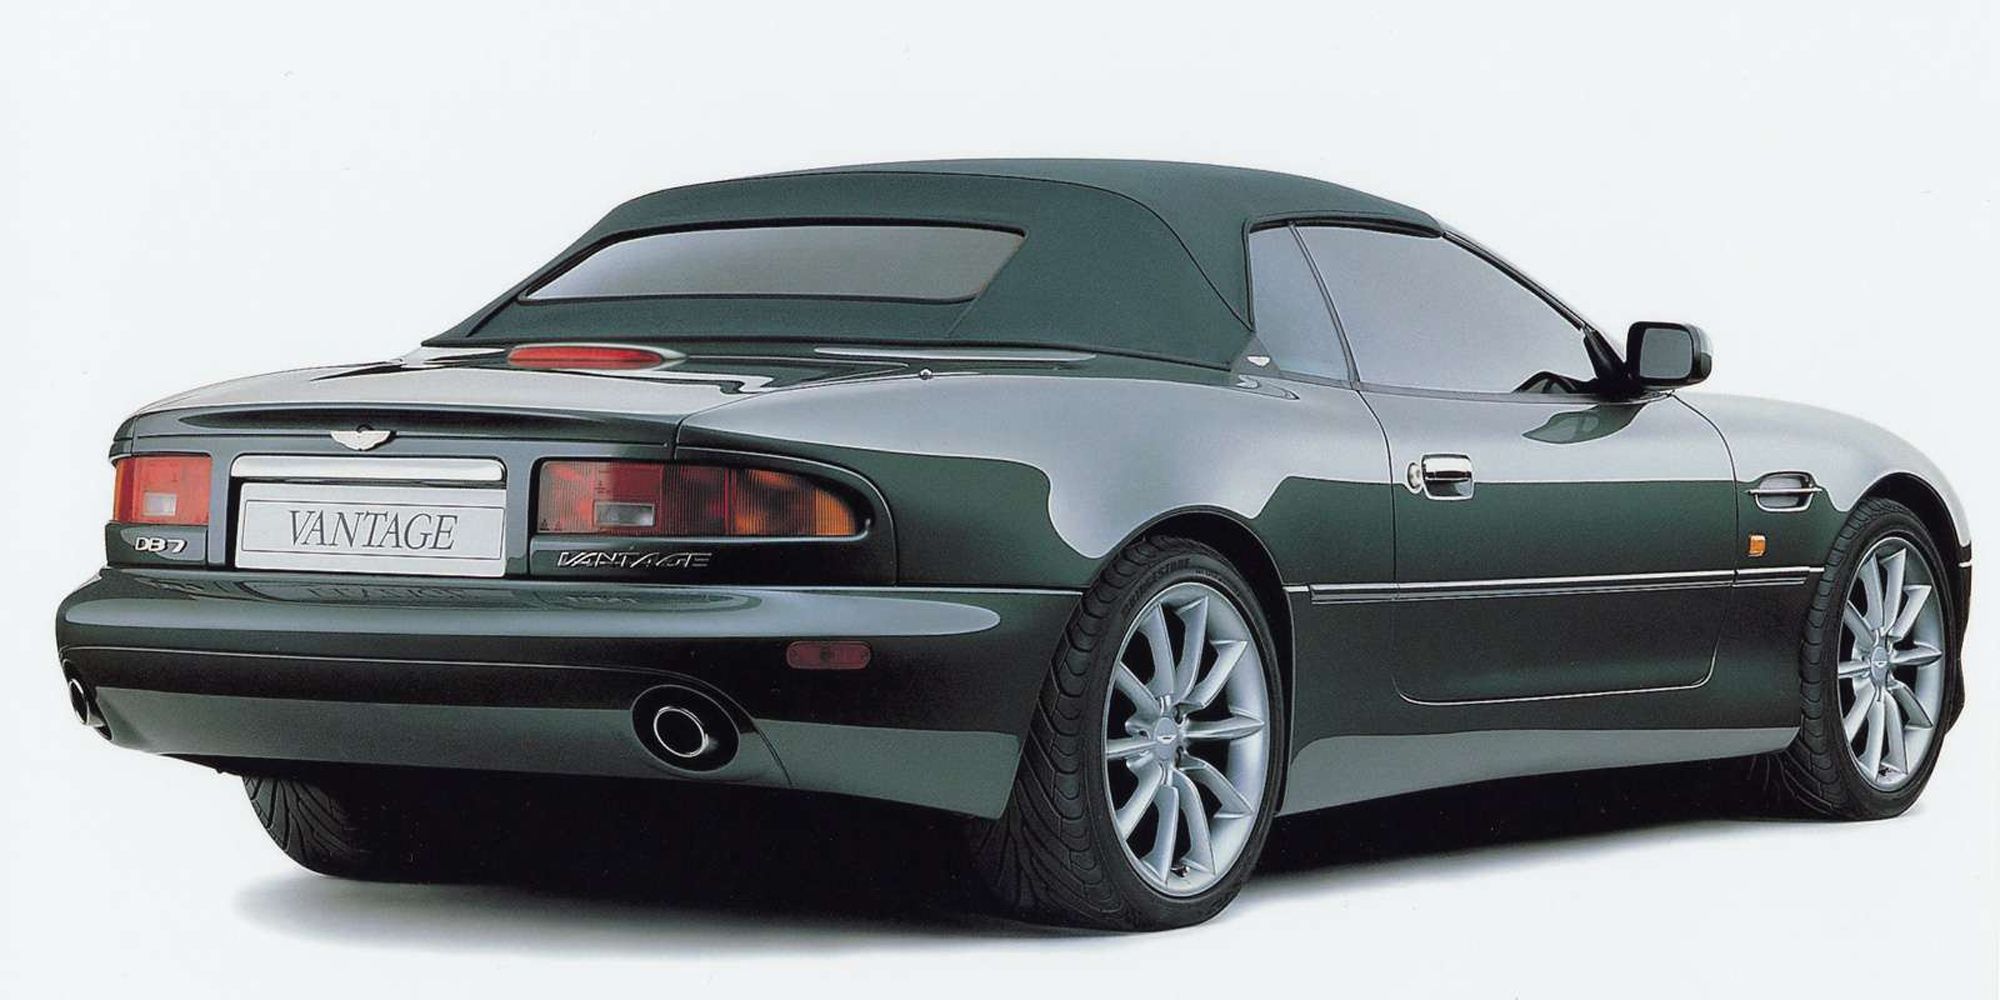 Rear 3/4 view of a green DB7